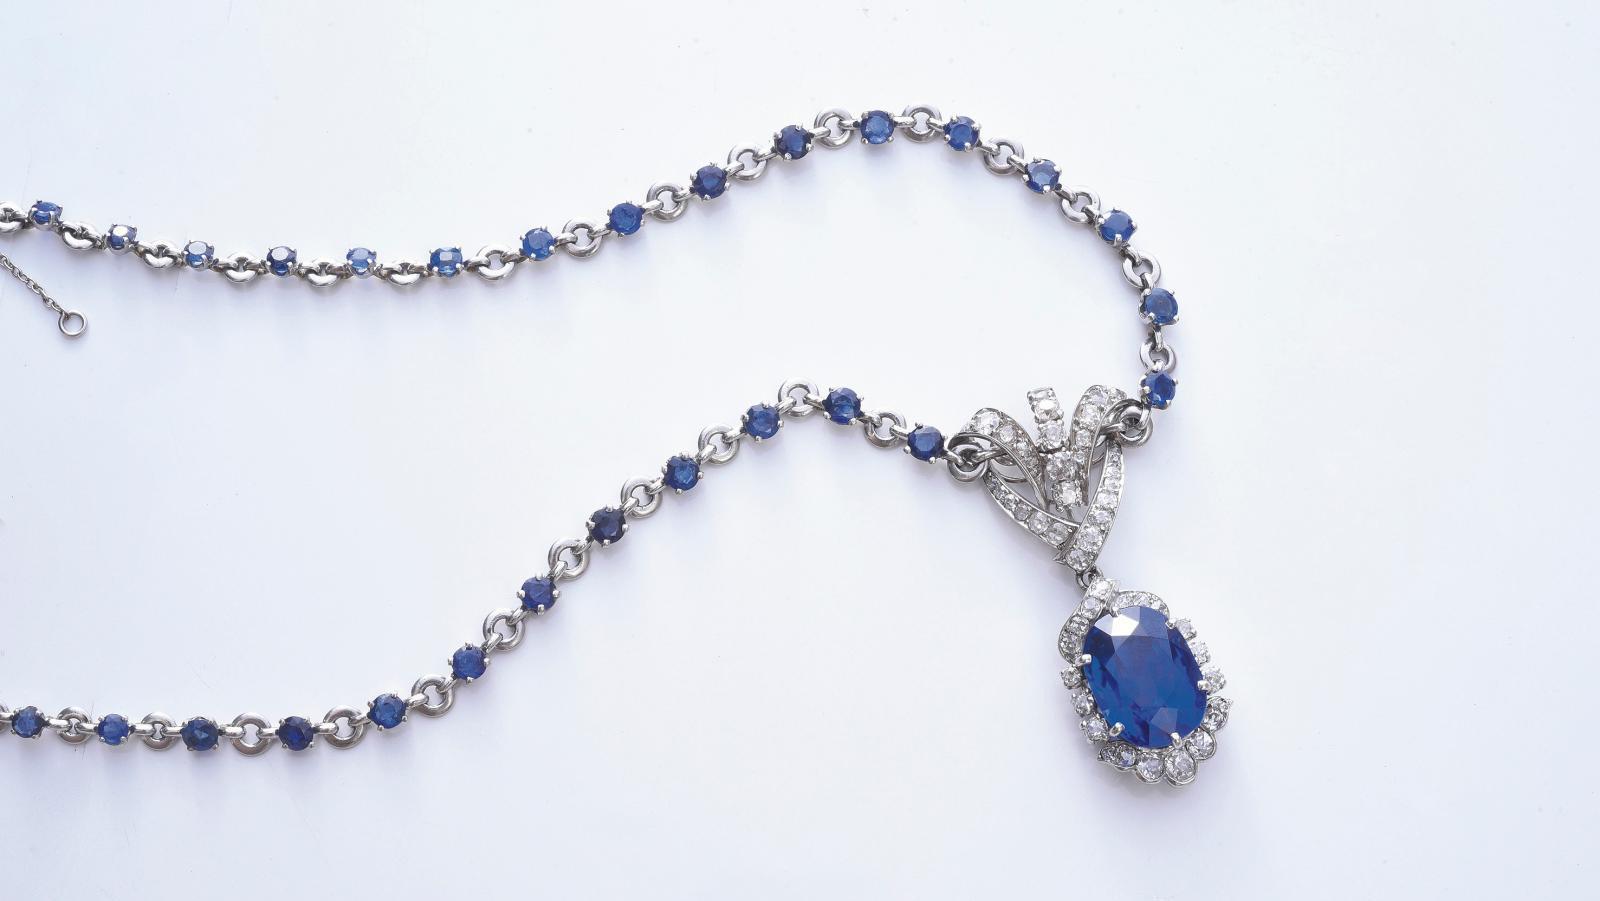 Van Cleef & Arpels. Jointed platinum necklace, the links alternating with 38 small... A Beautiful Sapphire by Van Cleef & Arpels